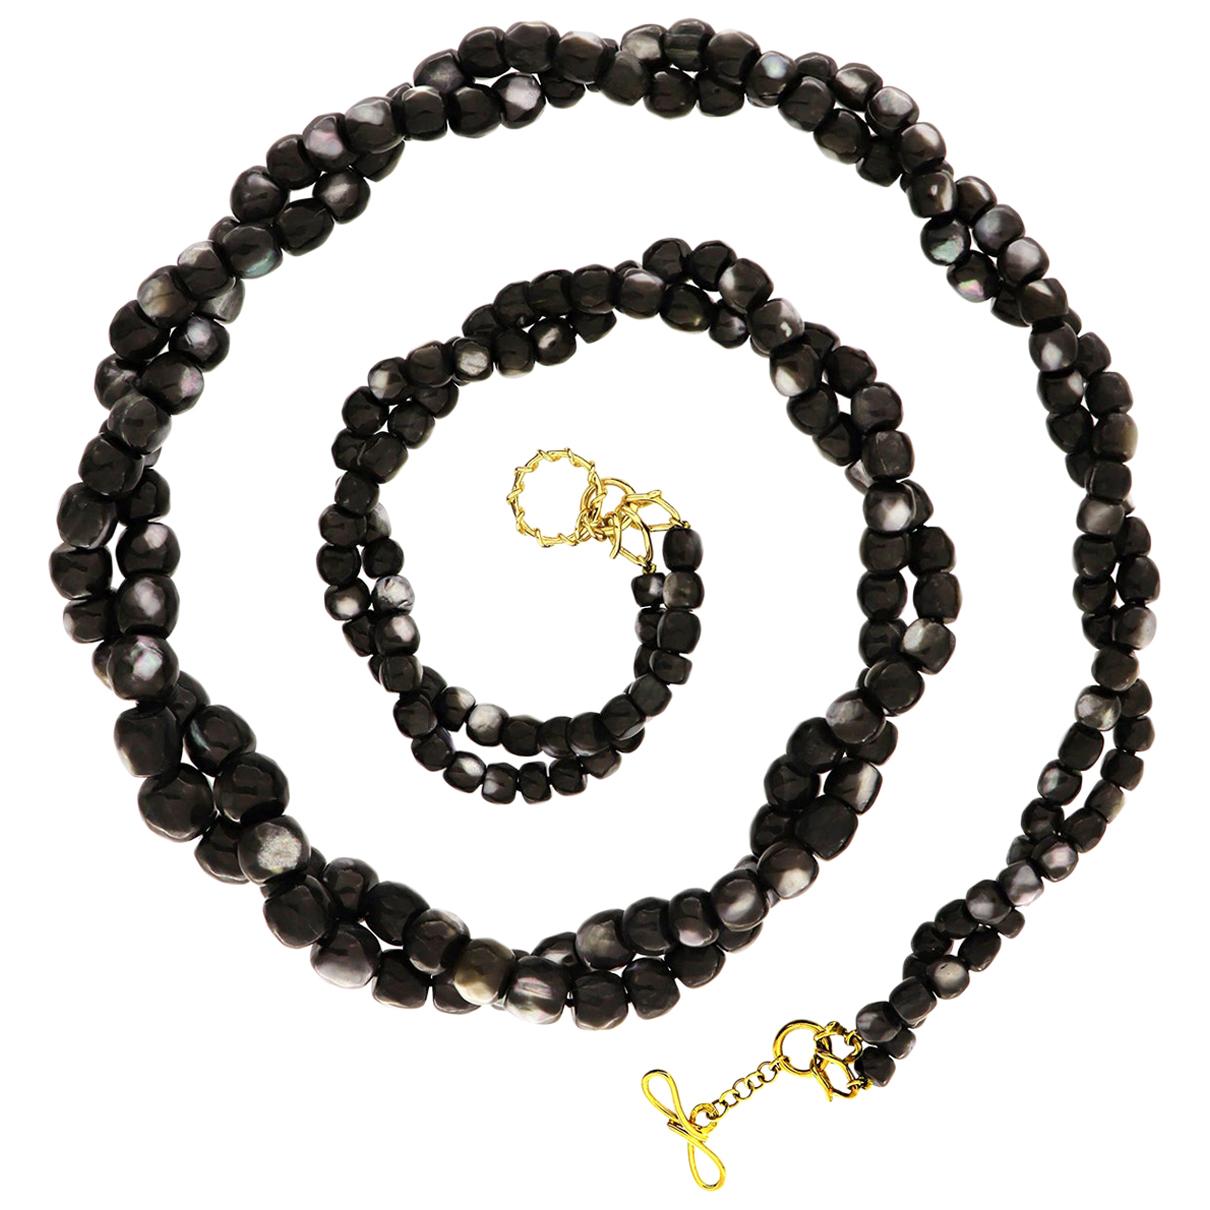 Valentin Magro Multi-Strand Barrel Shaped Faceted Black Mother of Pearl Necklace